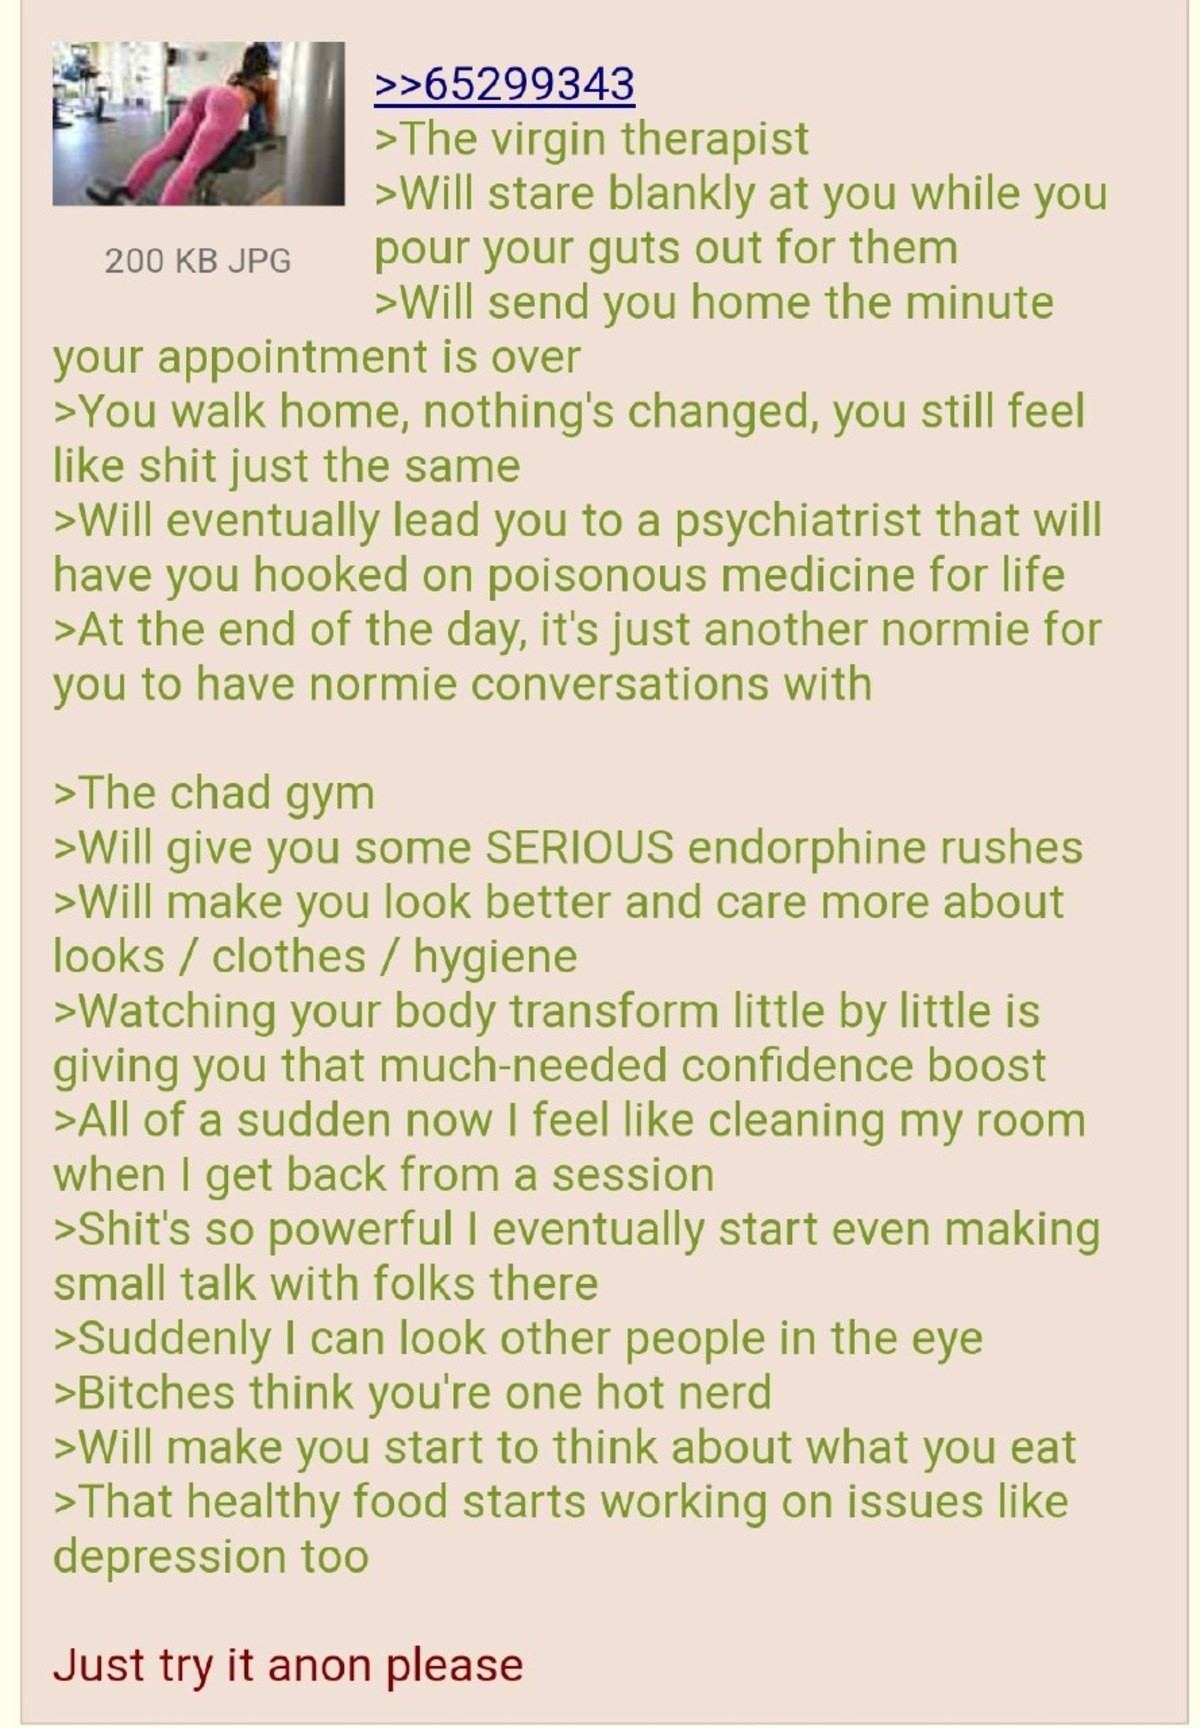 try it, anon. .. I don't get the endorphine rush, even if I push myself to breaking point. I've spent a lot of hours in the gym but the only thing I feel is pain and tired. I st